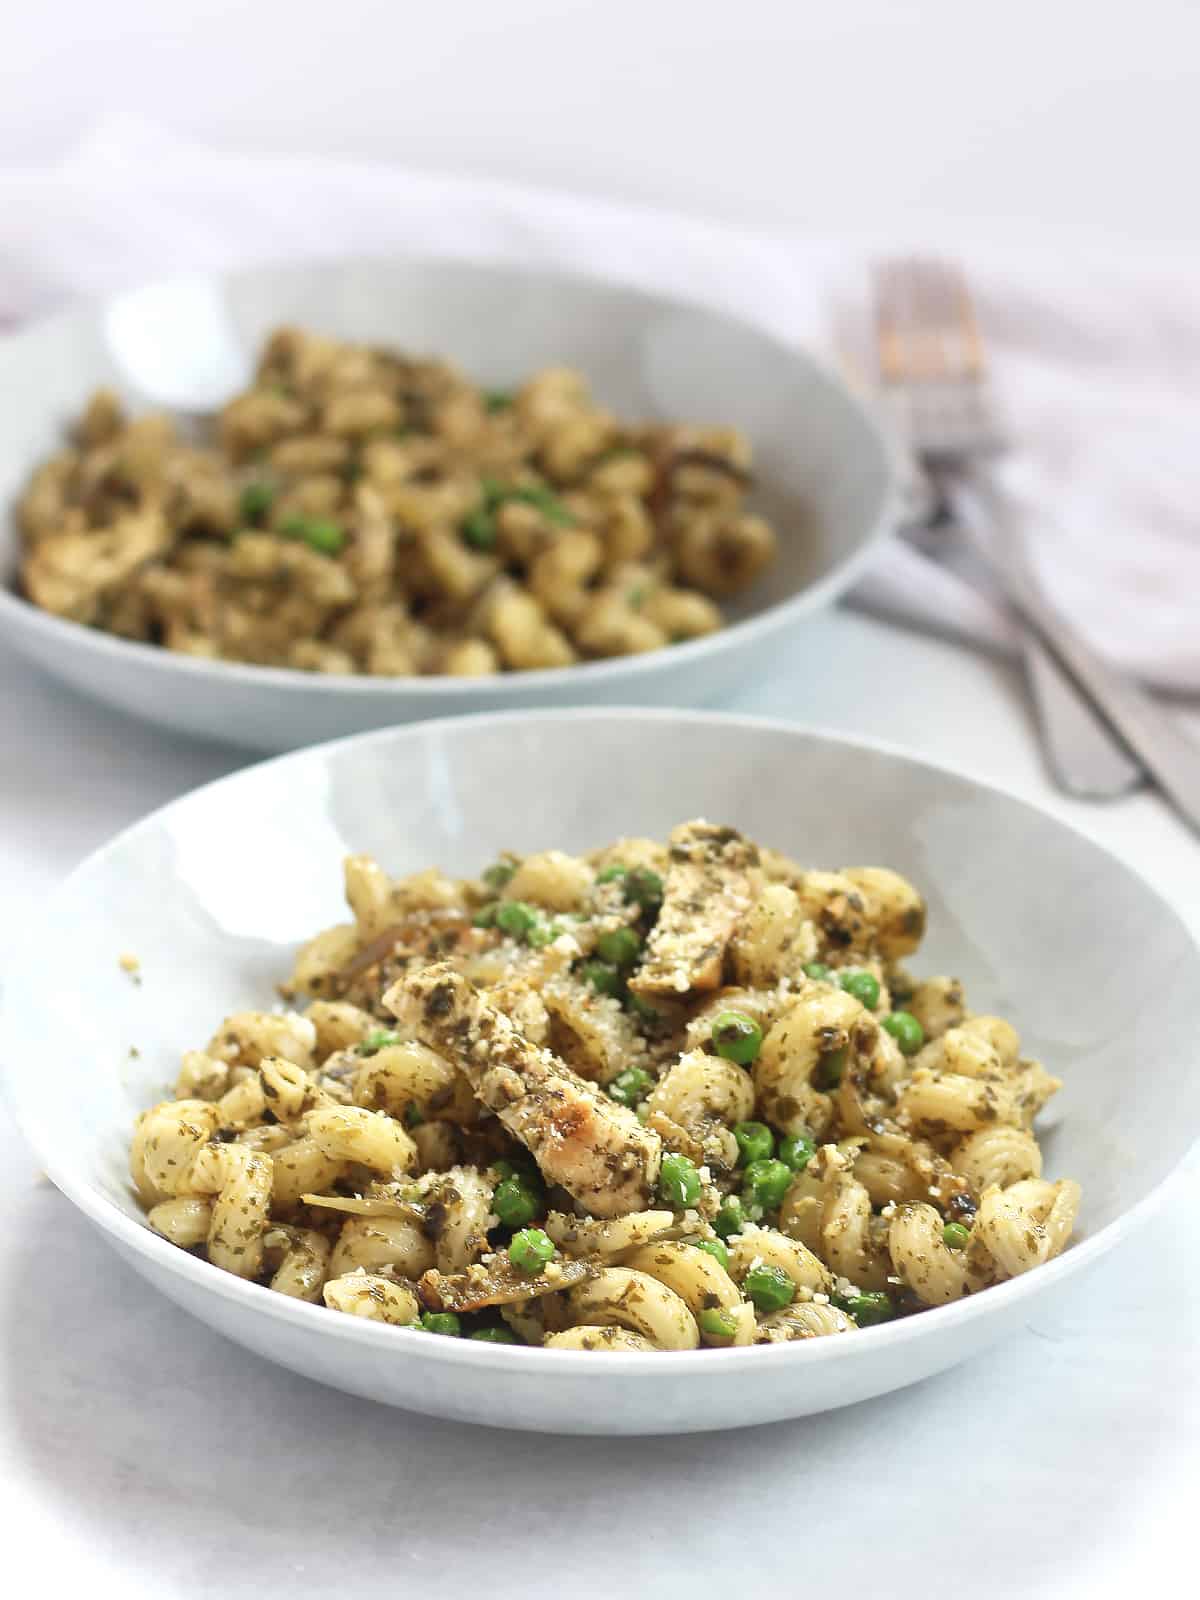 Two bowls of pasta with chicken, pesto and peas.